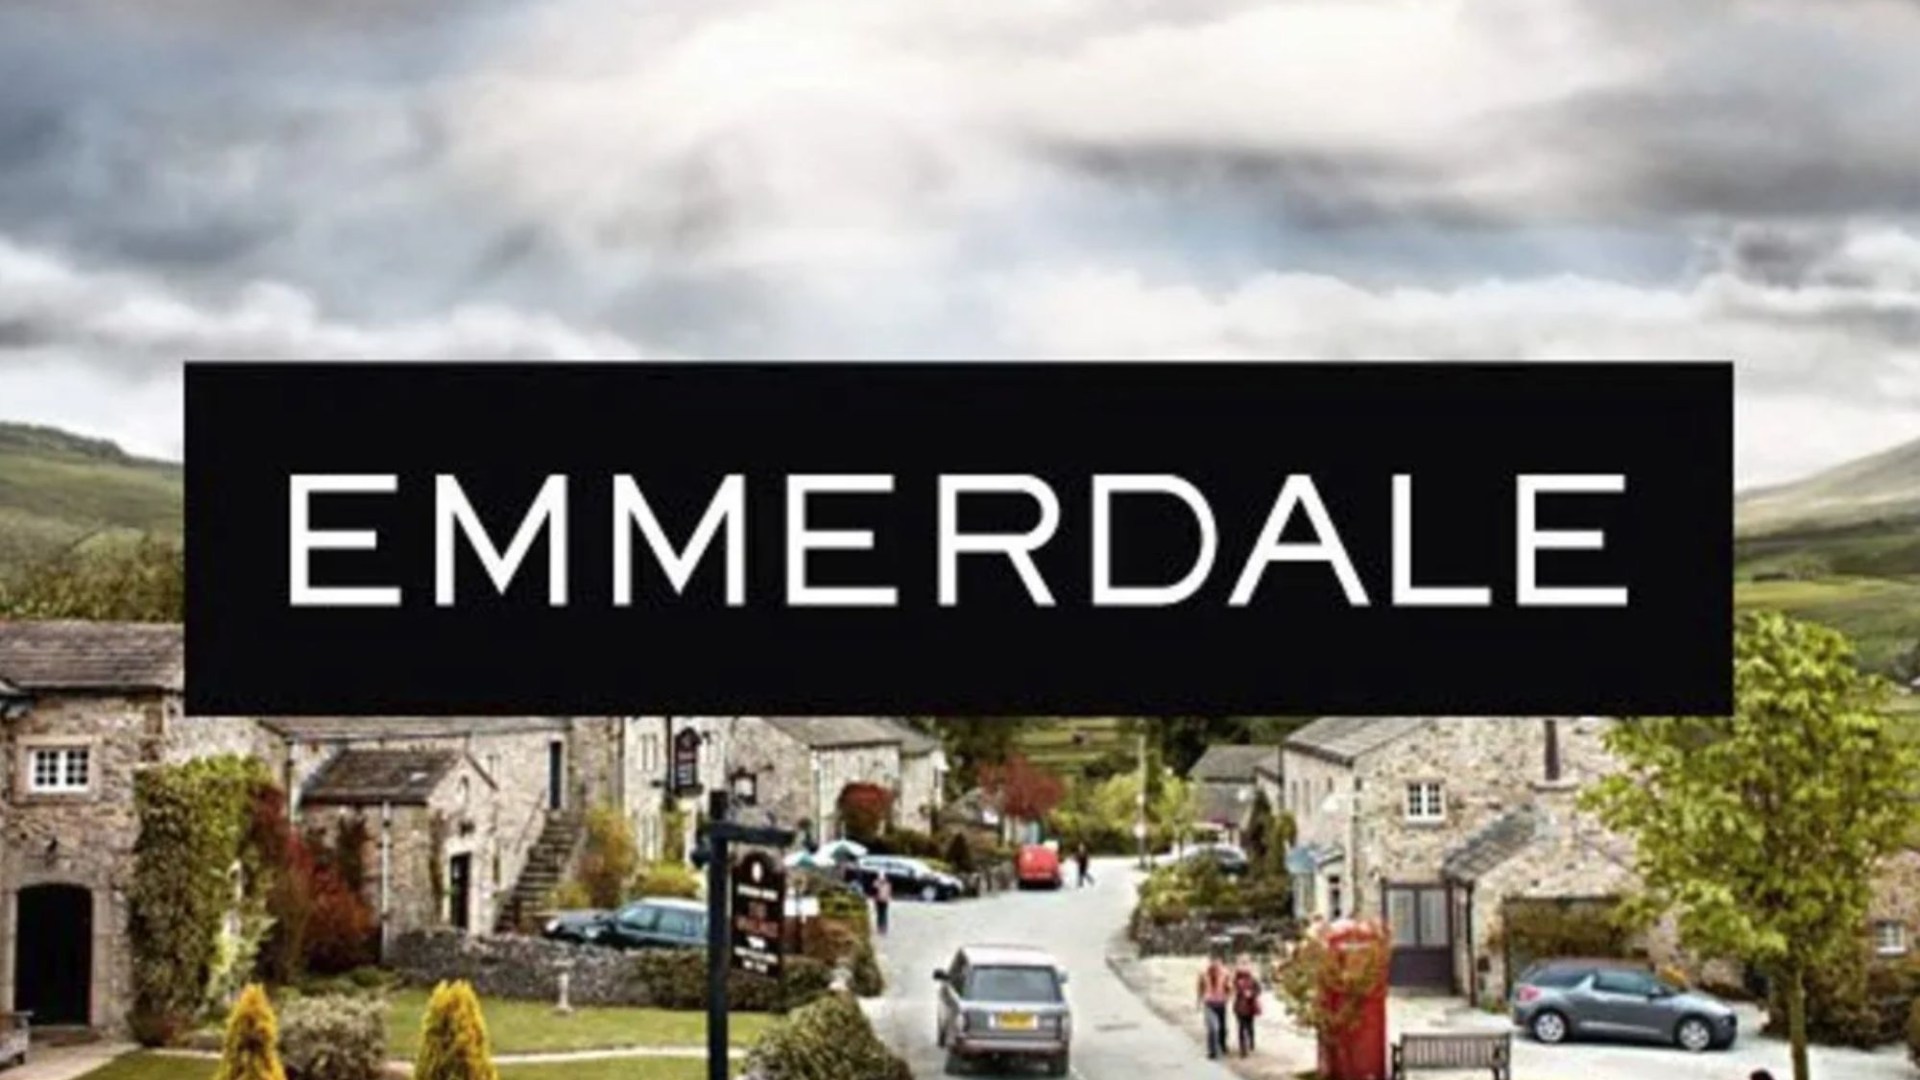 ‘Treating us with contempt!’ fume Emmerdale fans as they blast ‘dull and humourless’ soap for ‘wasting great characters’ [Video]